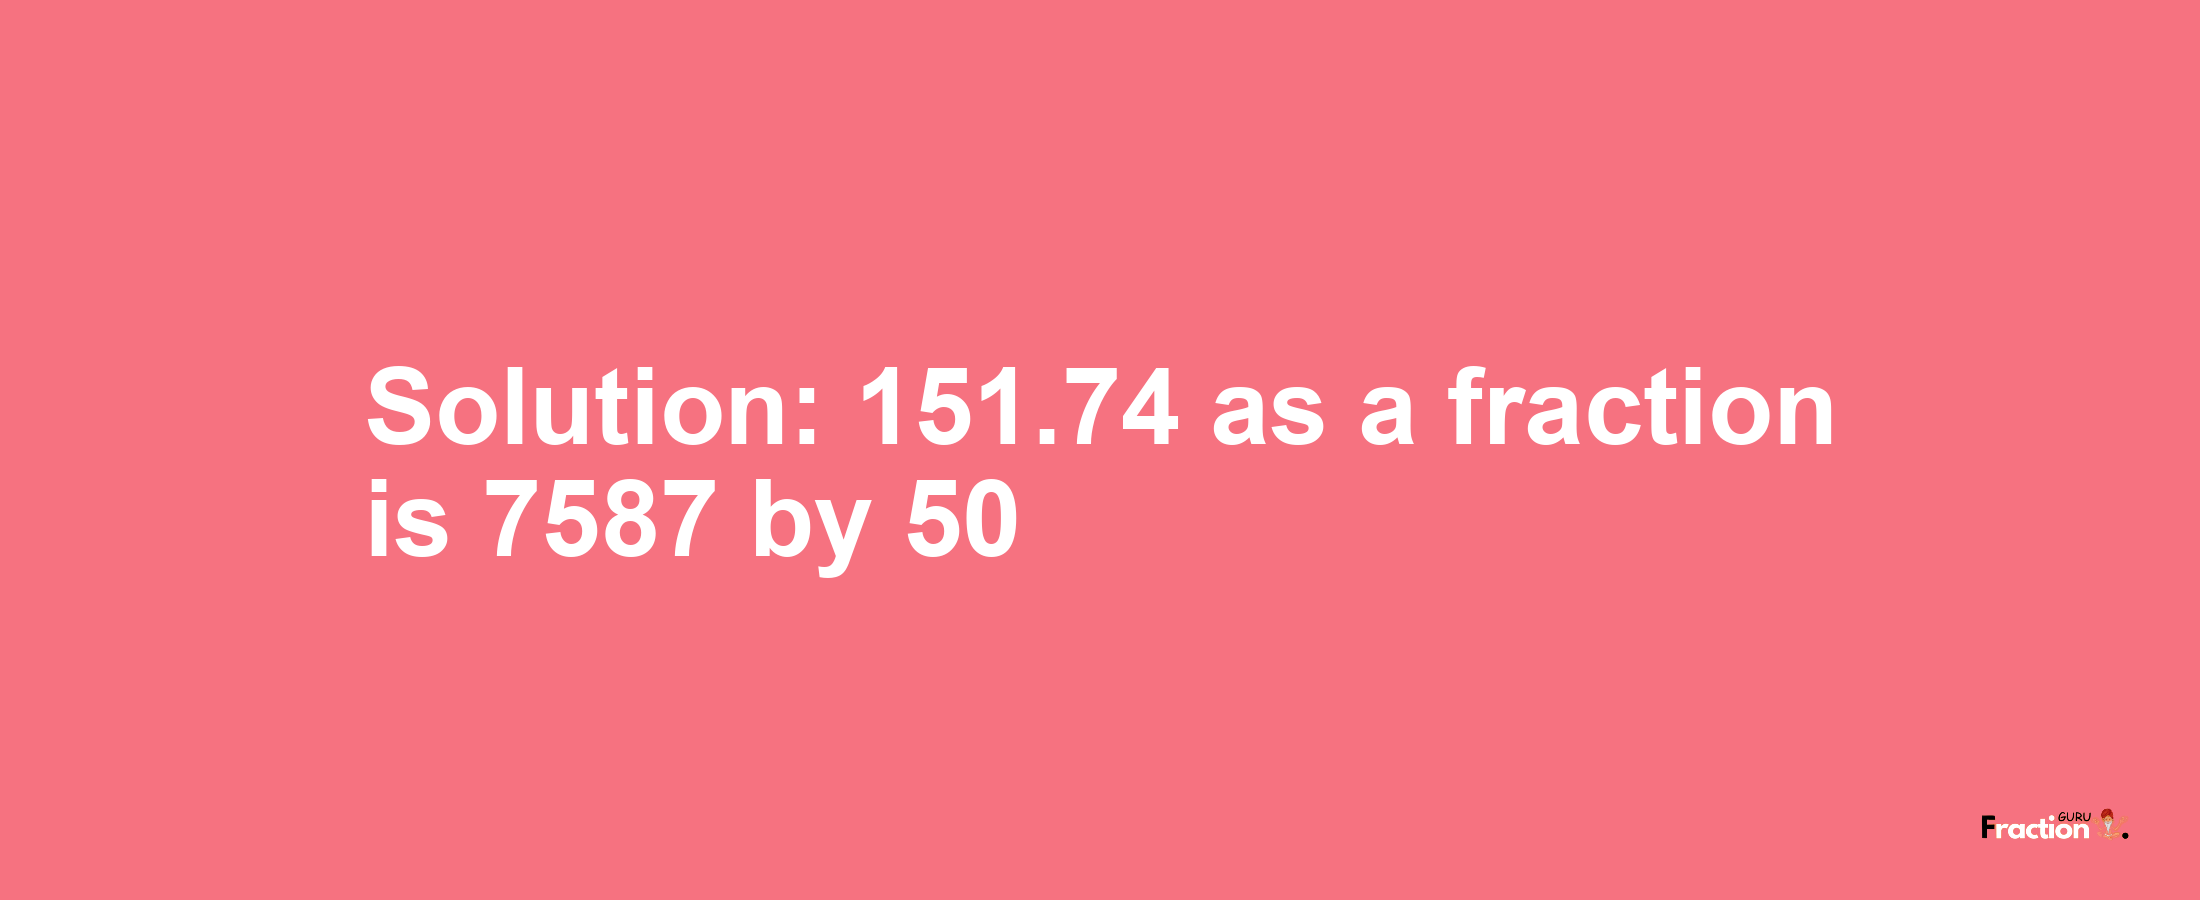 Solution:151.74 as a fraction is 7587/50